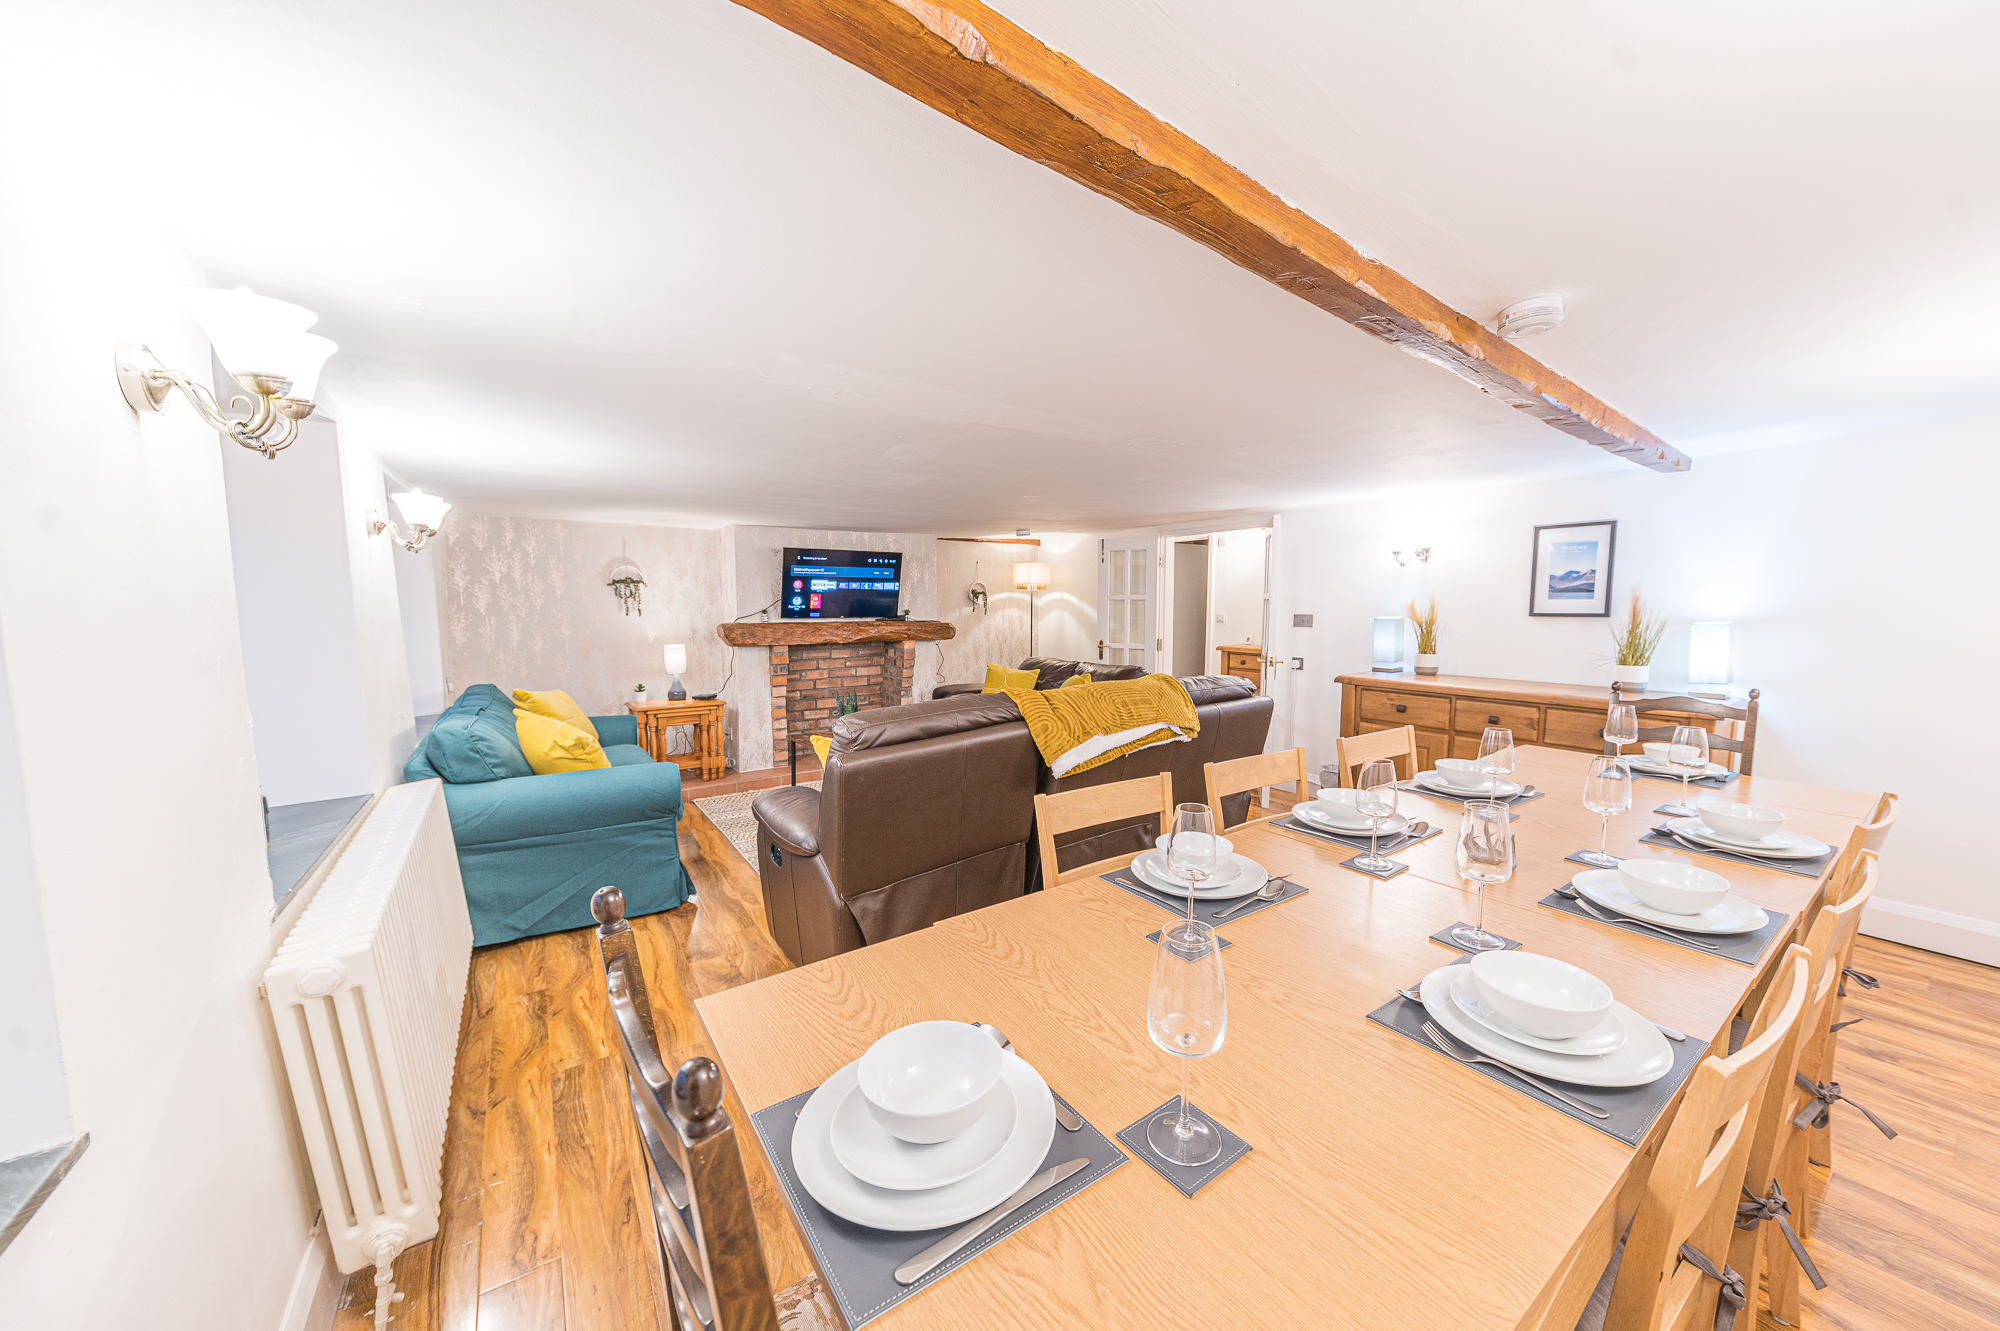 Lakeland View Holiday Home - Living/Dining Area